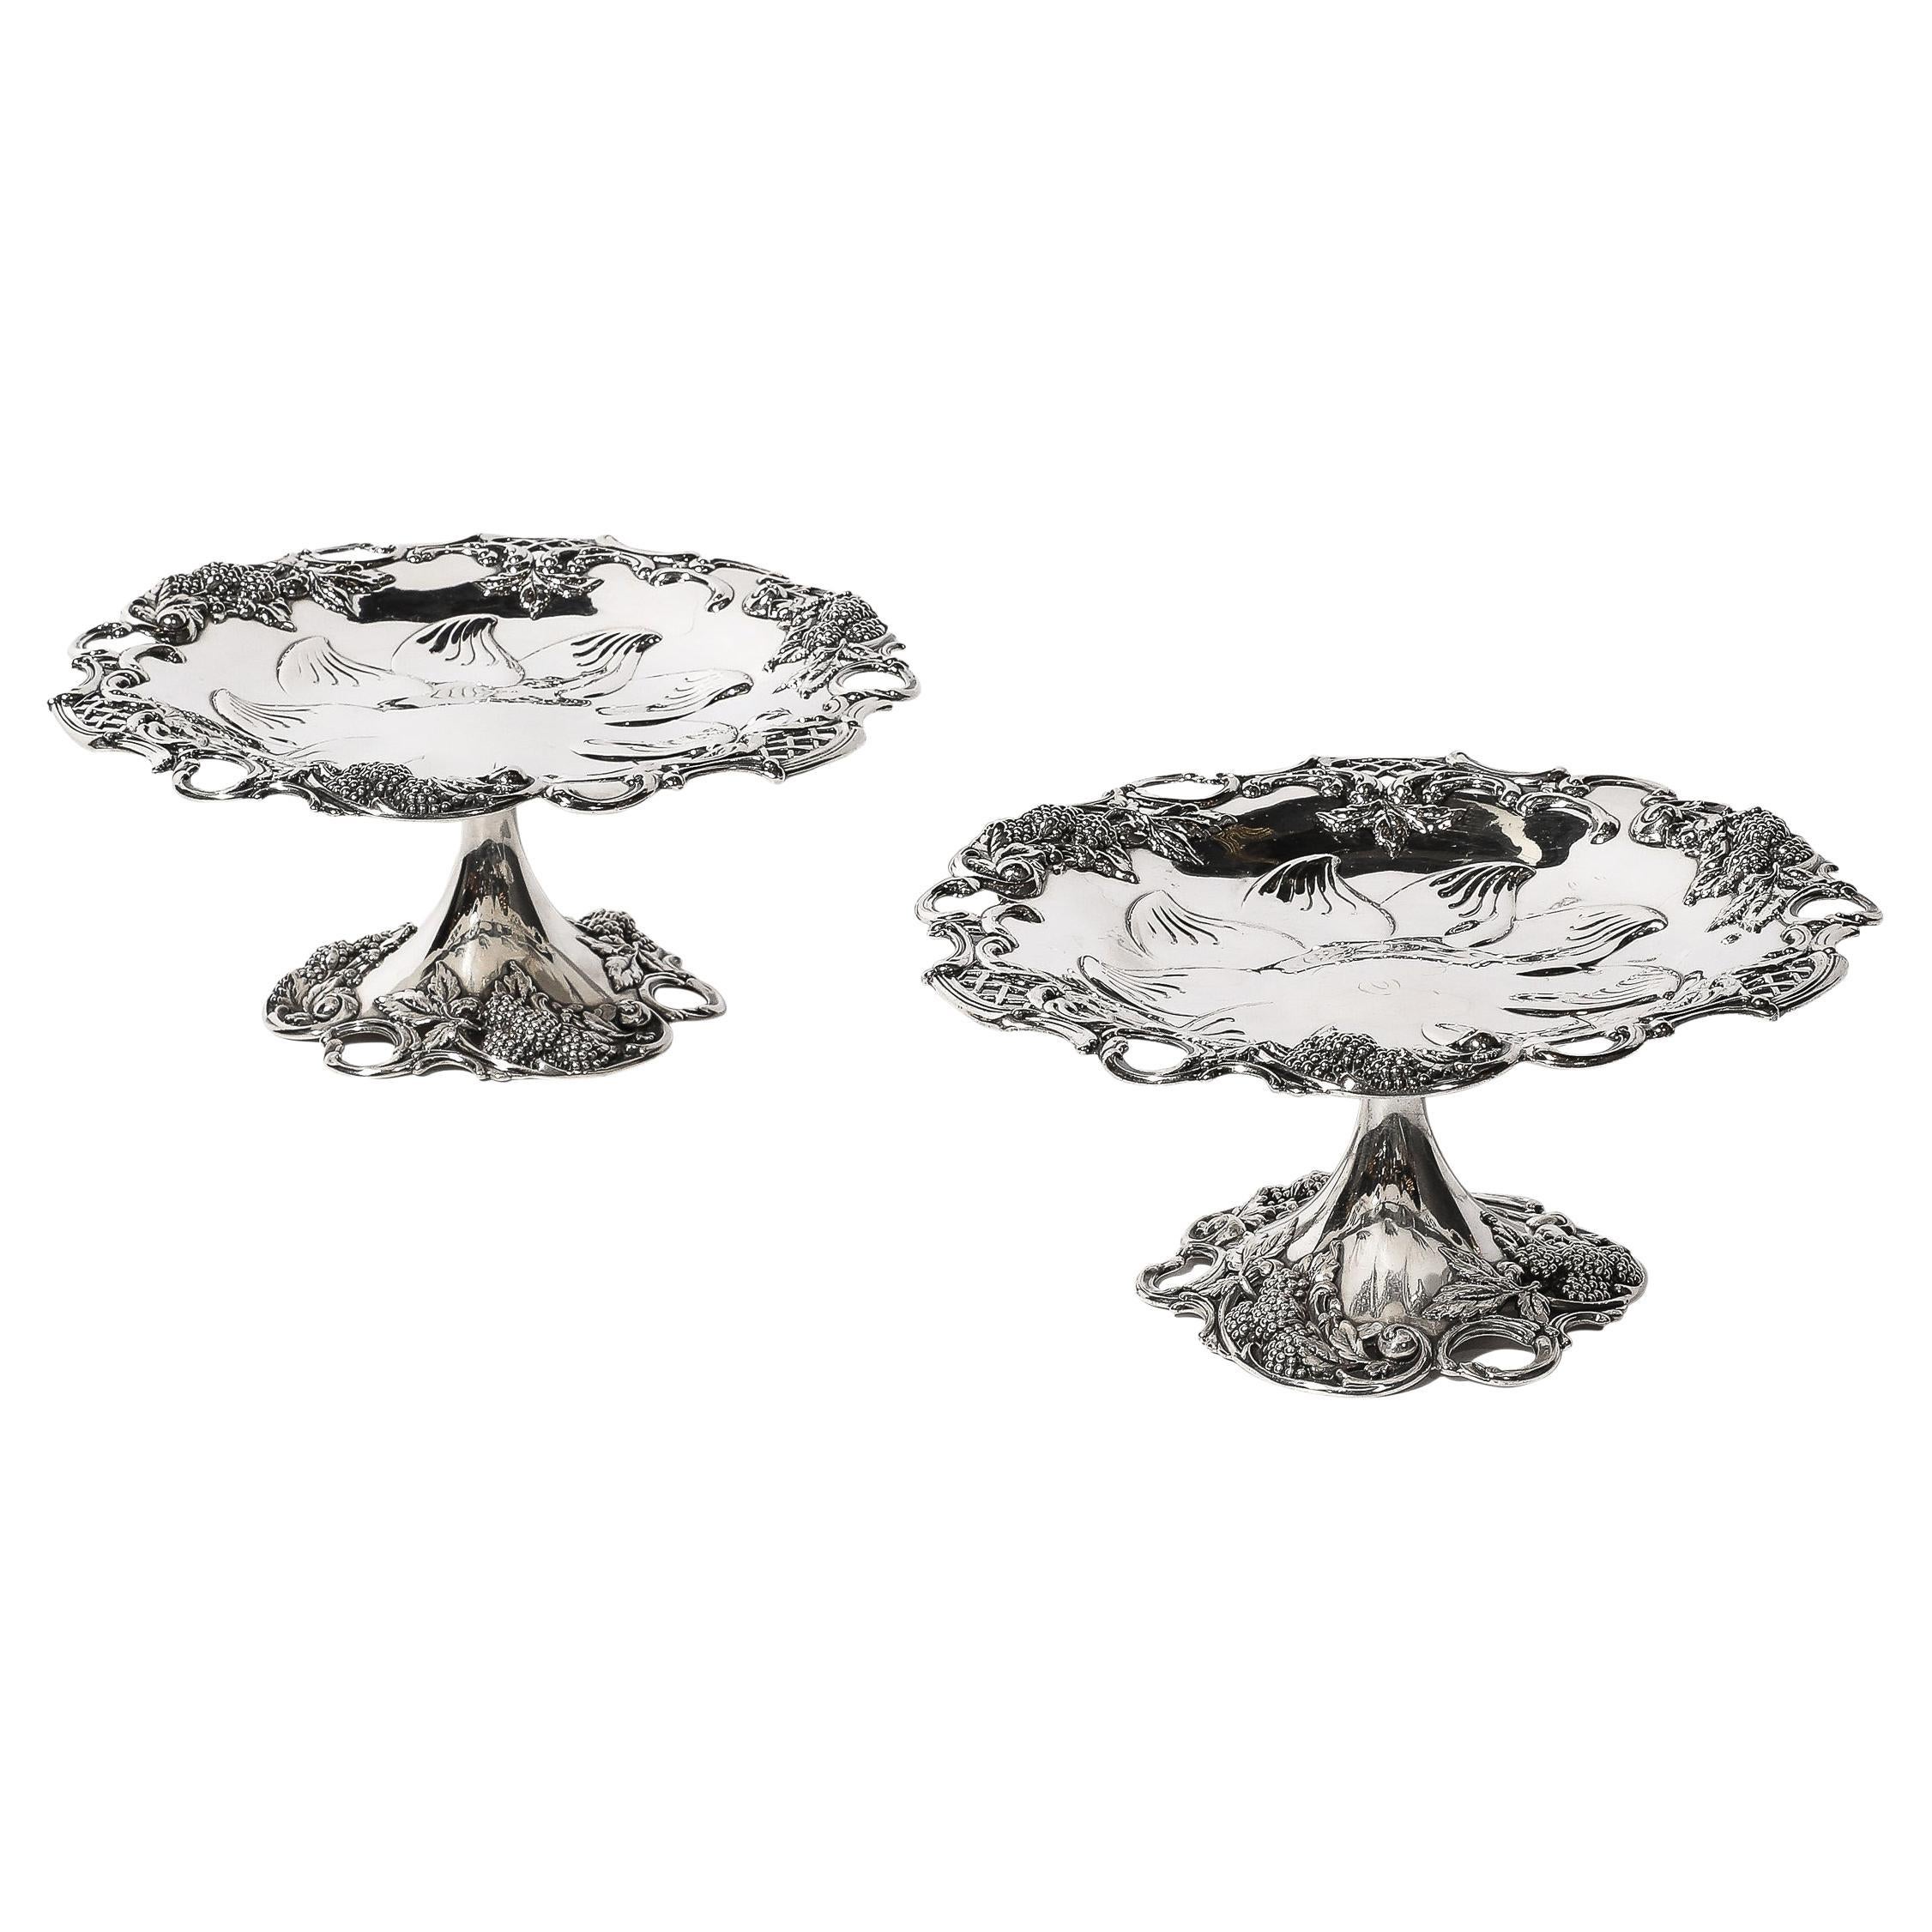 Paar Tiffany & Co. Sterling Silber „Blackberry“ Compotes/Tazza im Angebot